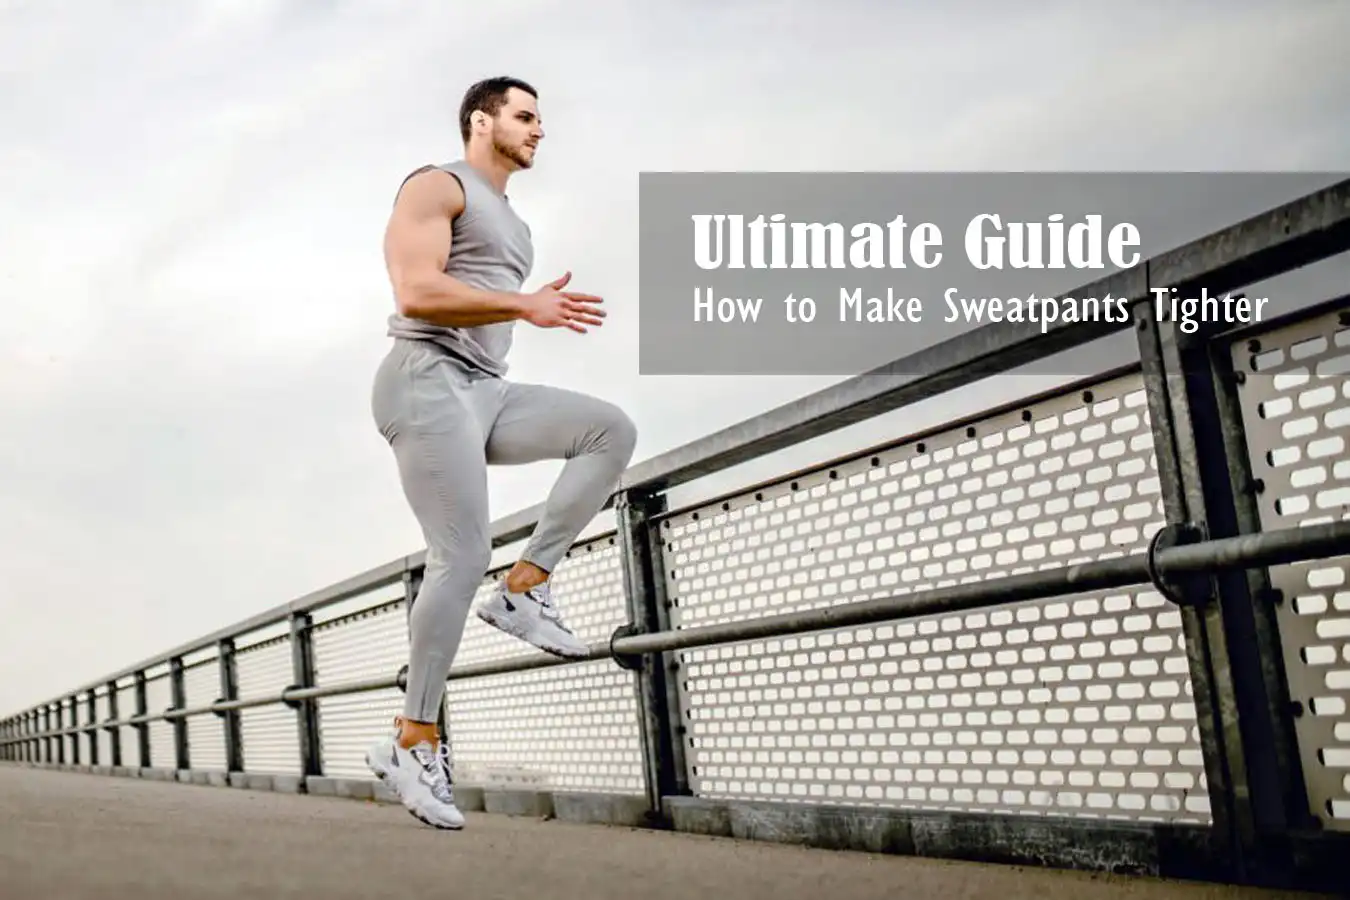 How to Make Sweatpants Tighter